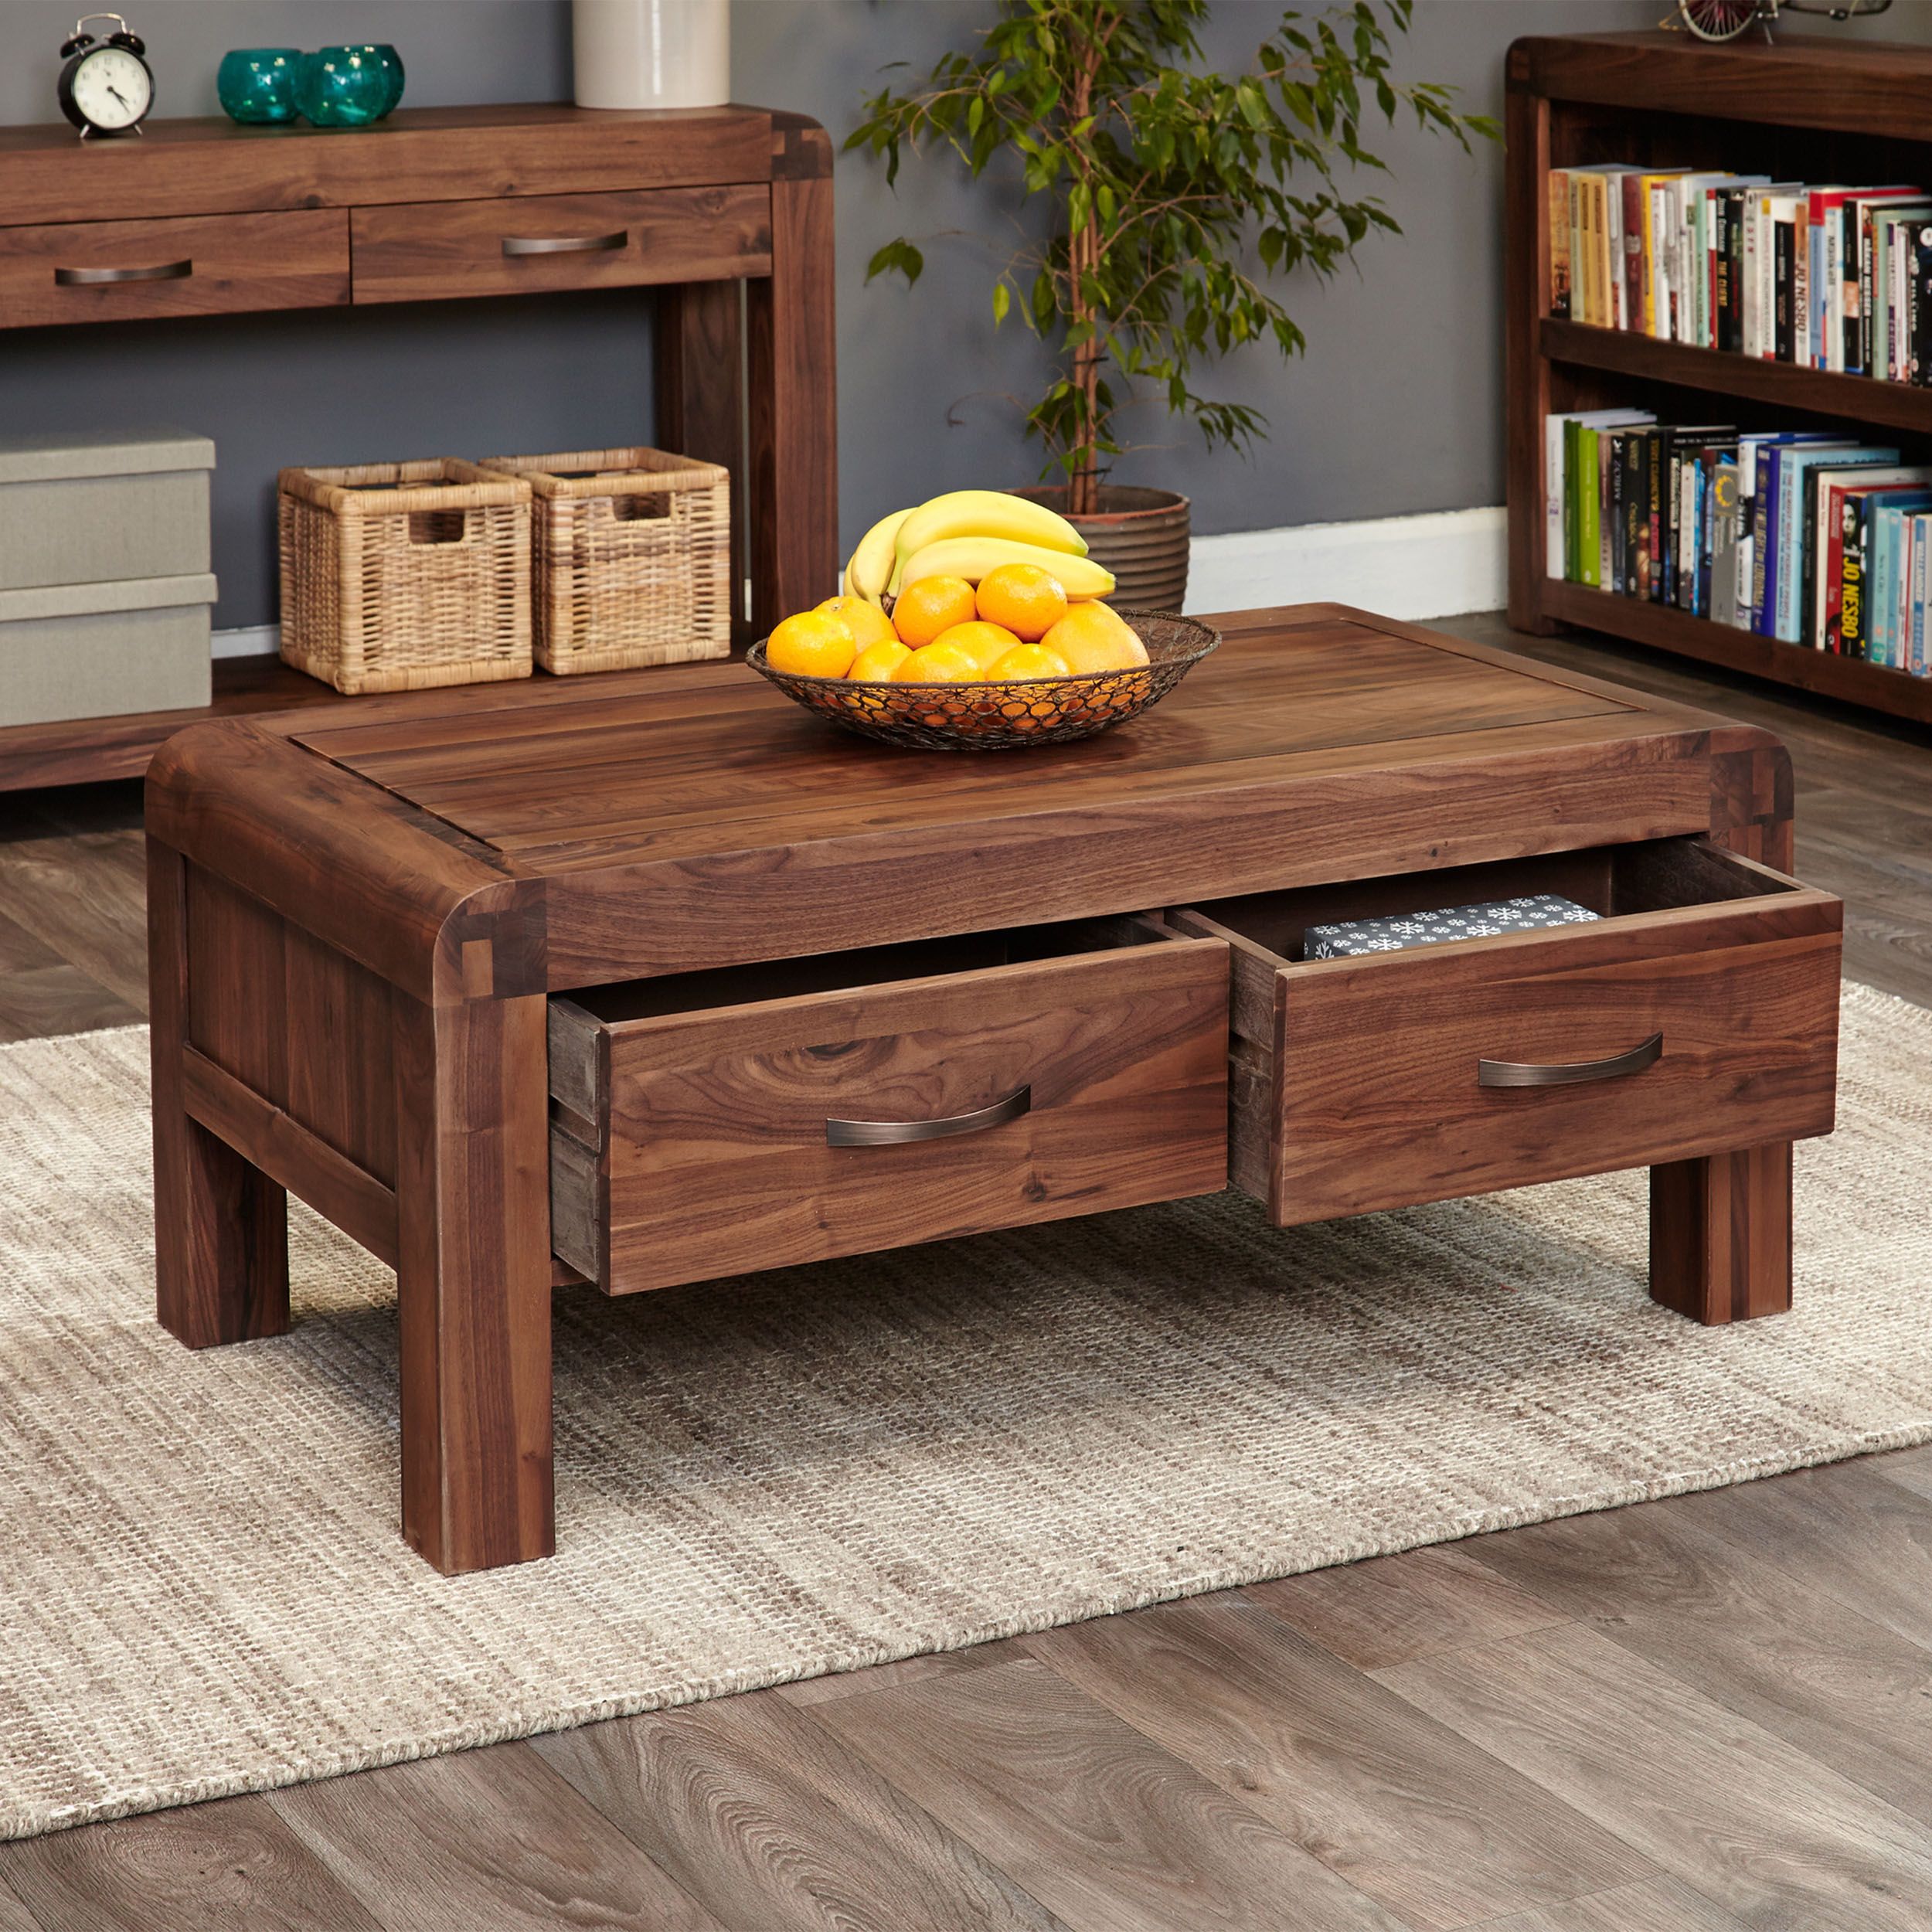 Solid Walnut Coffee Table With Storage – Shiro Regarding Pemberly Row Replicated Wood Coffee Tables (View 15 of 20)